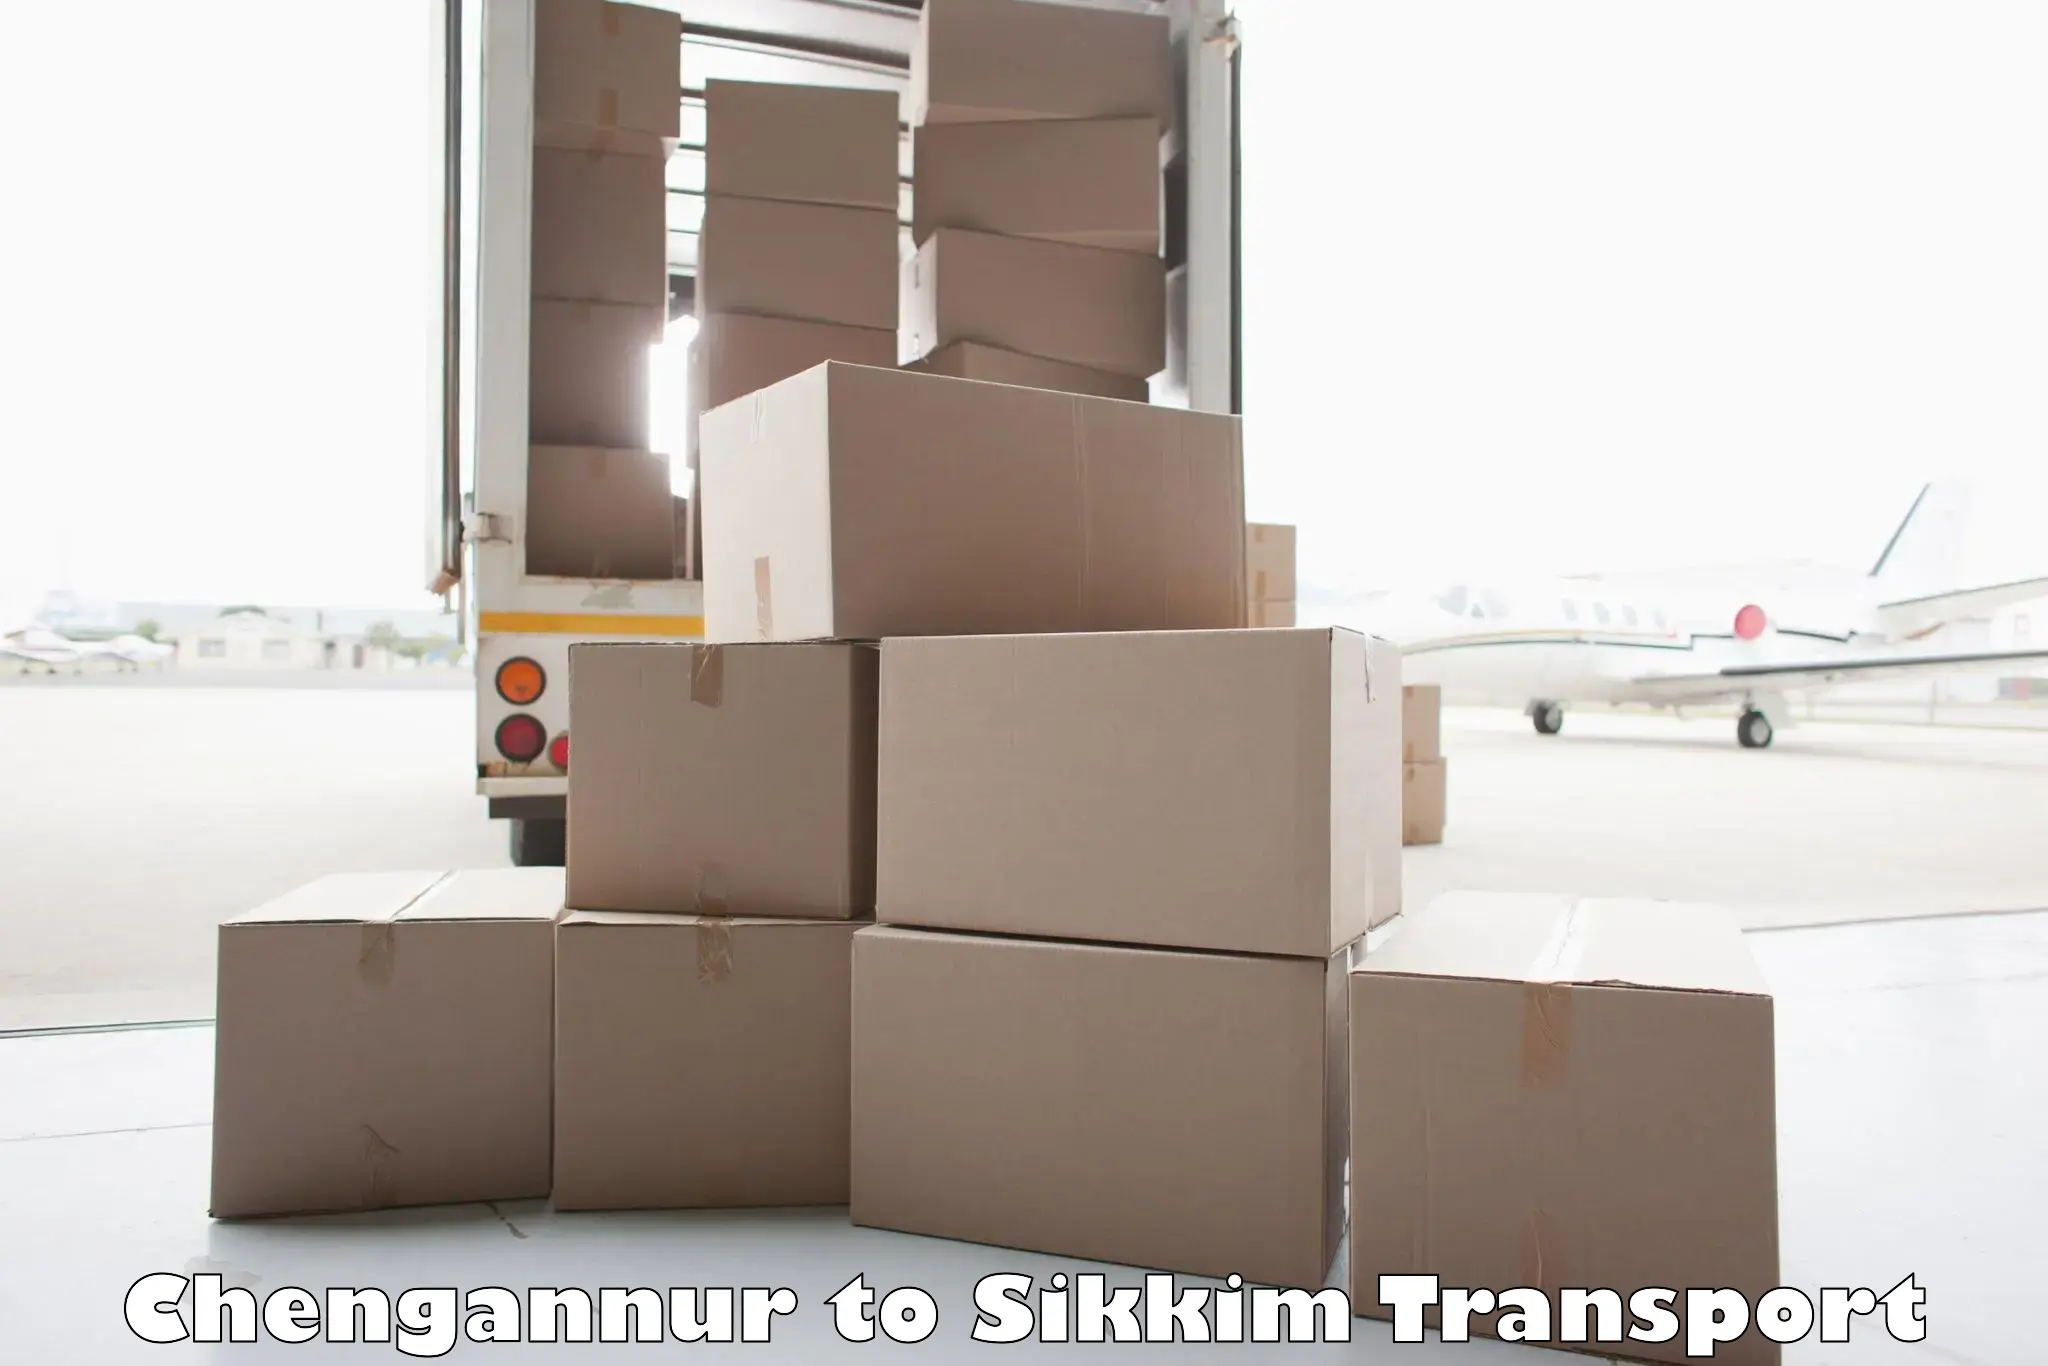 Cycle transportation service Chengannur to East Sikkim